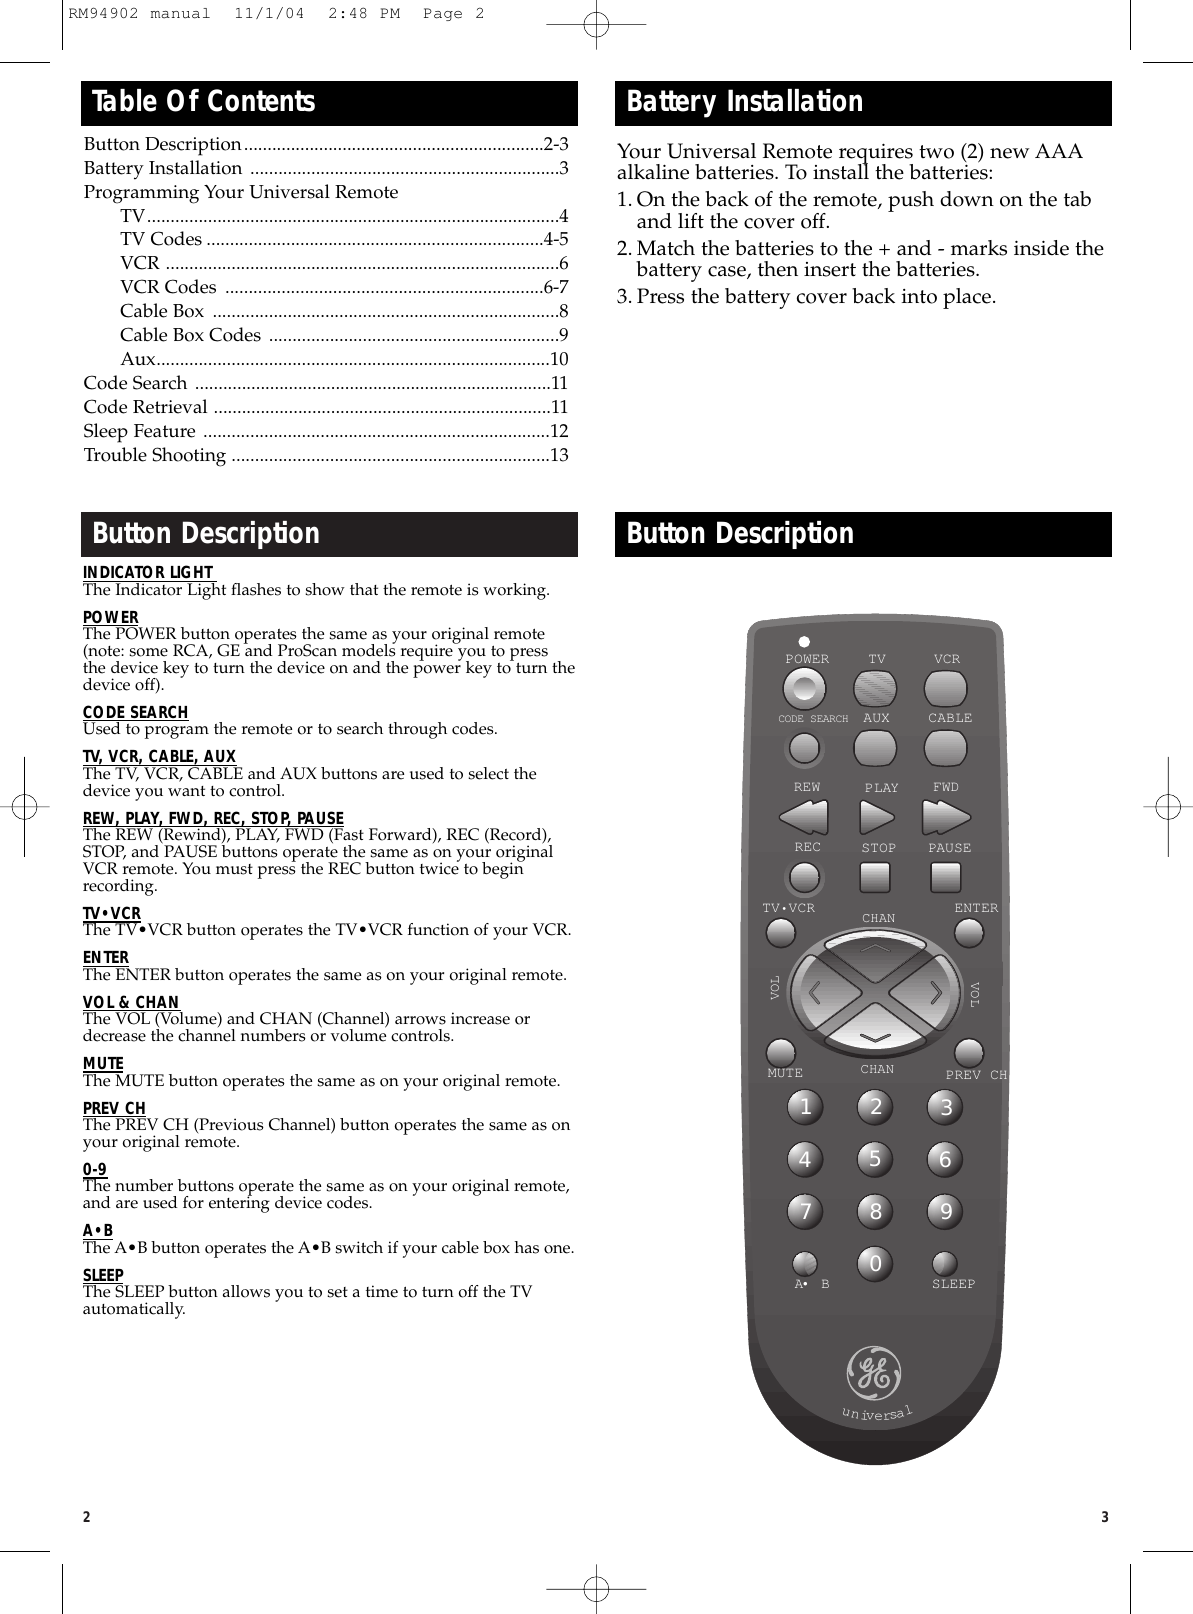 Page 1 of 8 - Ge-Appliances Ge-94902-Ge-Universal-Remote-Owners-Manual RM94902 Manual